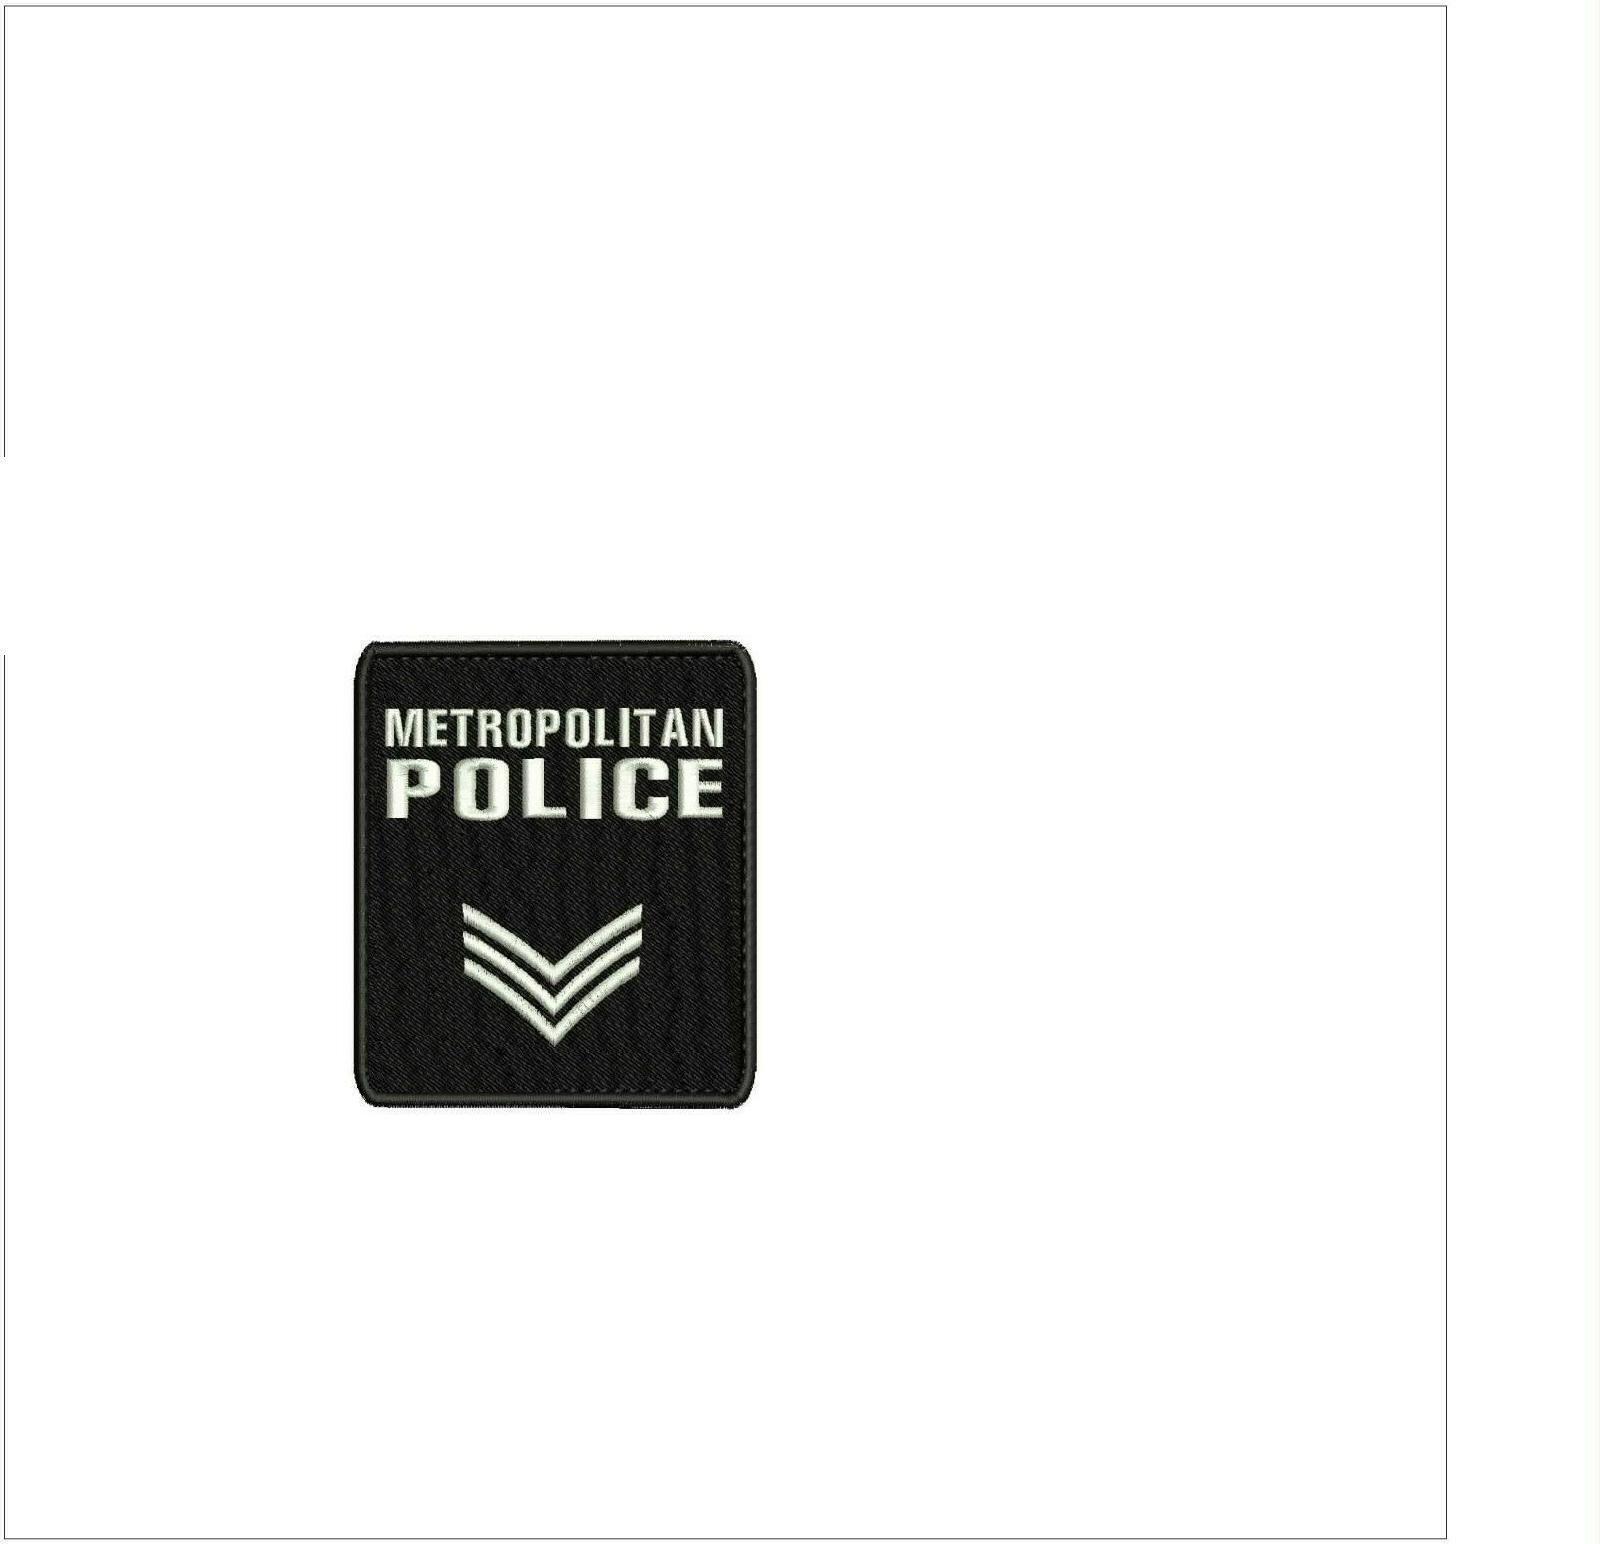 METROPOLITAN POLICE embroidery patches 4x4.5 hook ON BACK BLK/WHITE